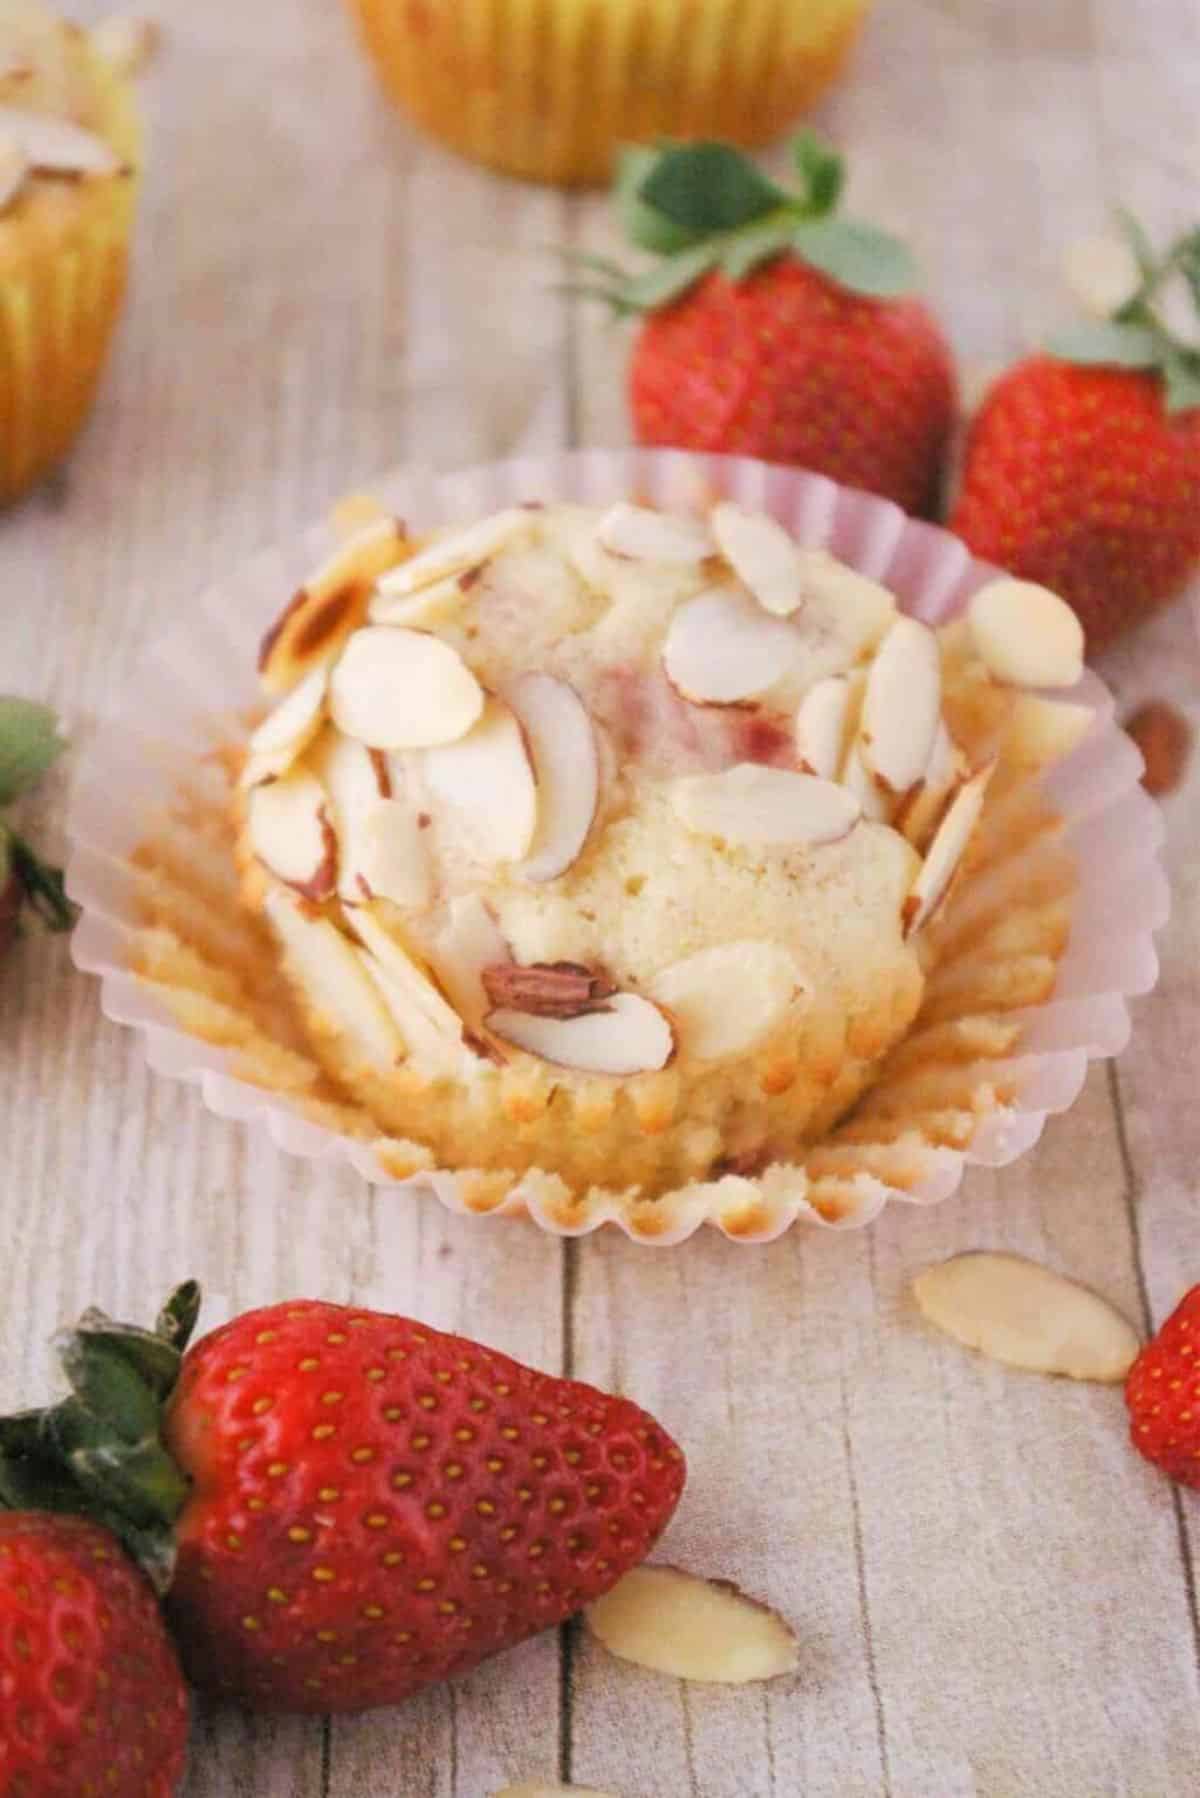 Strawberry Muffin with Almonds with scattered strawberries on a wooden table.